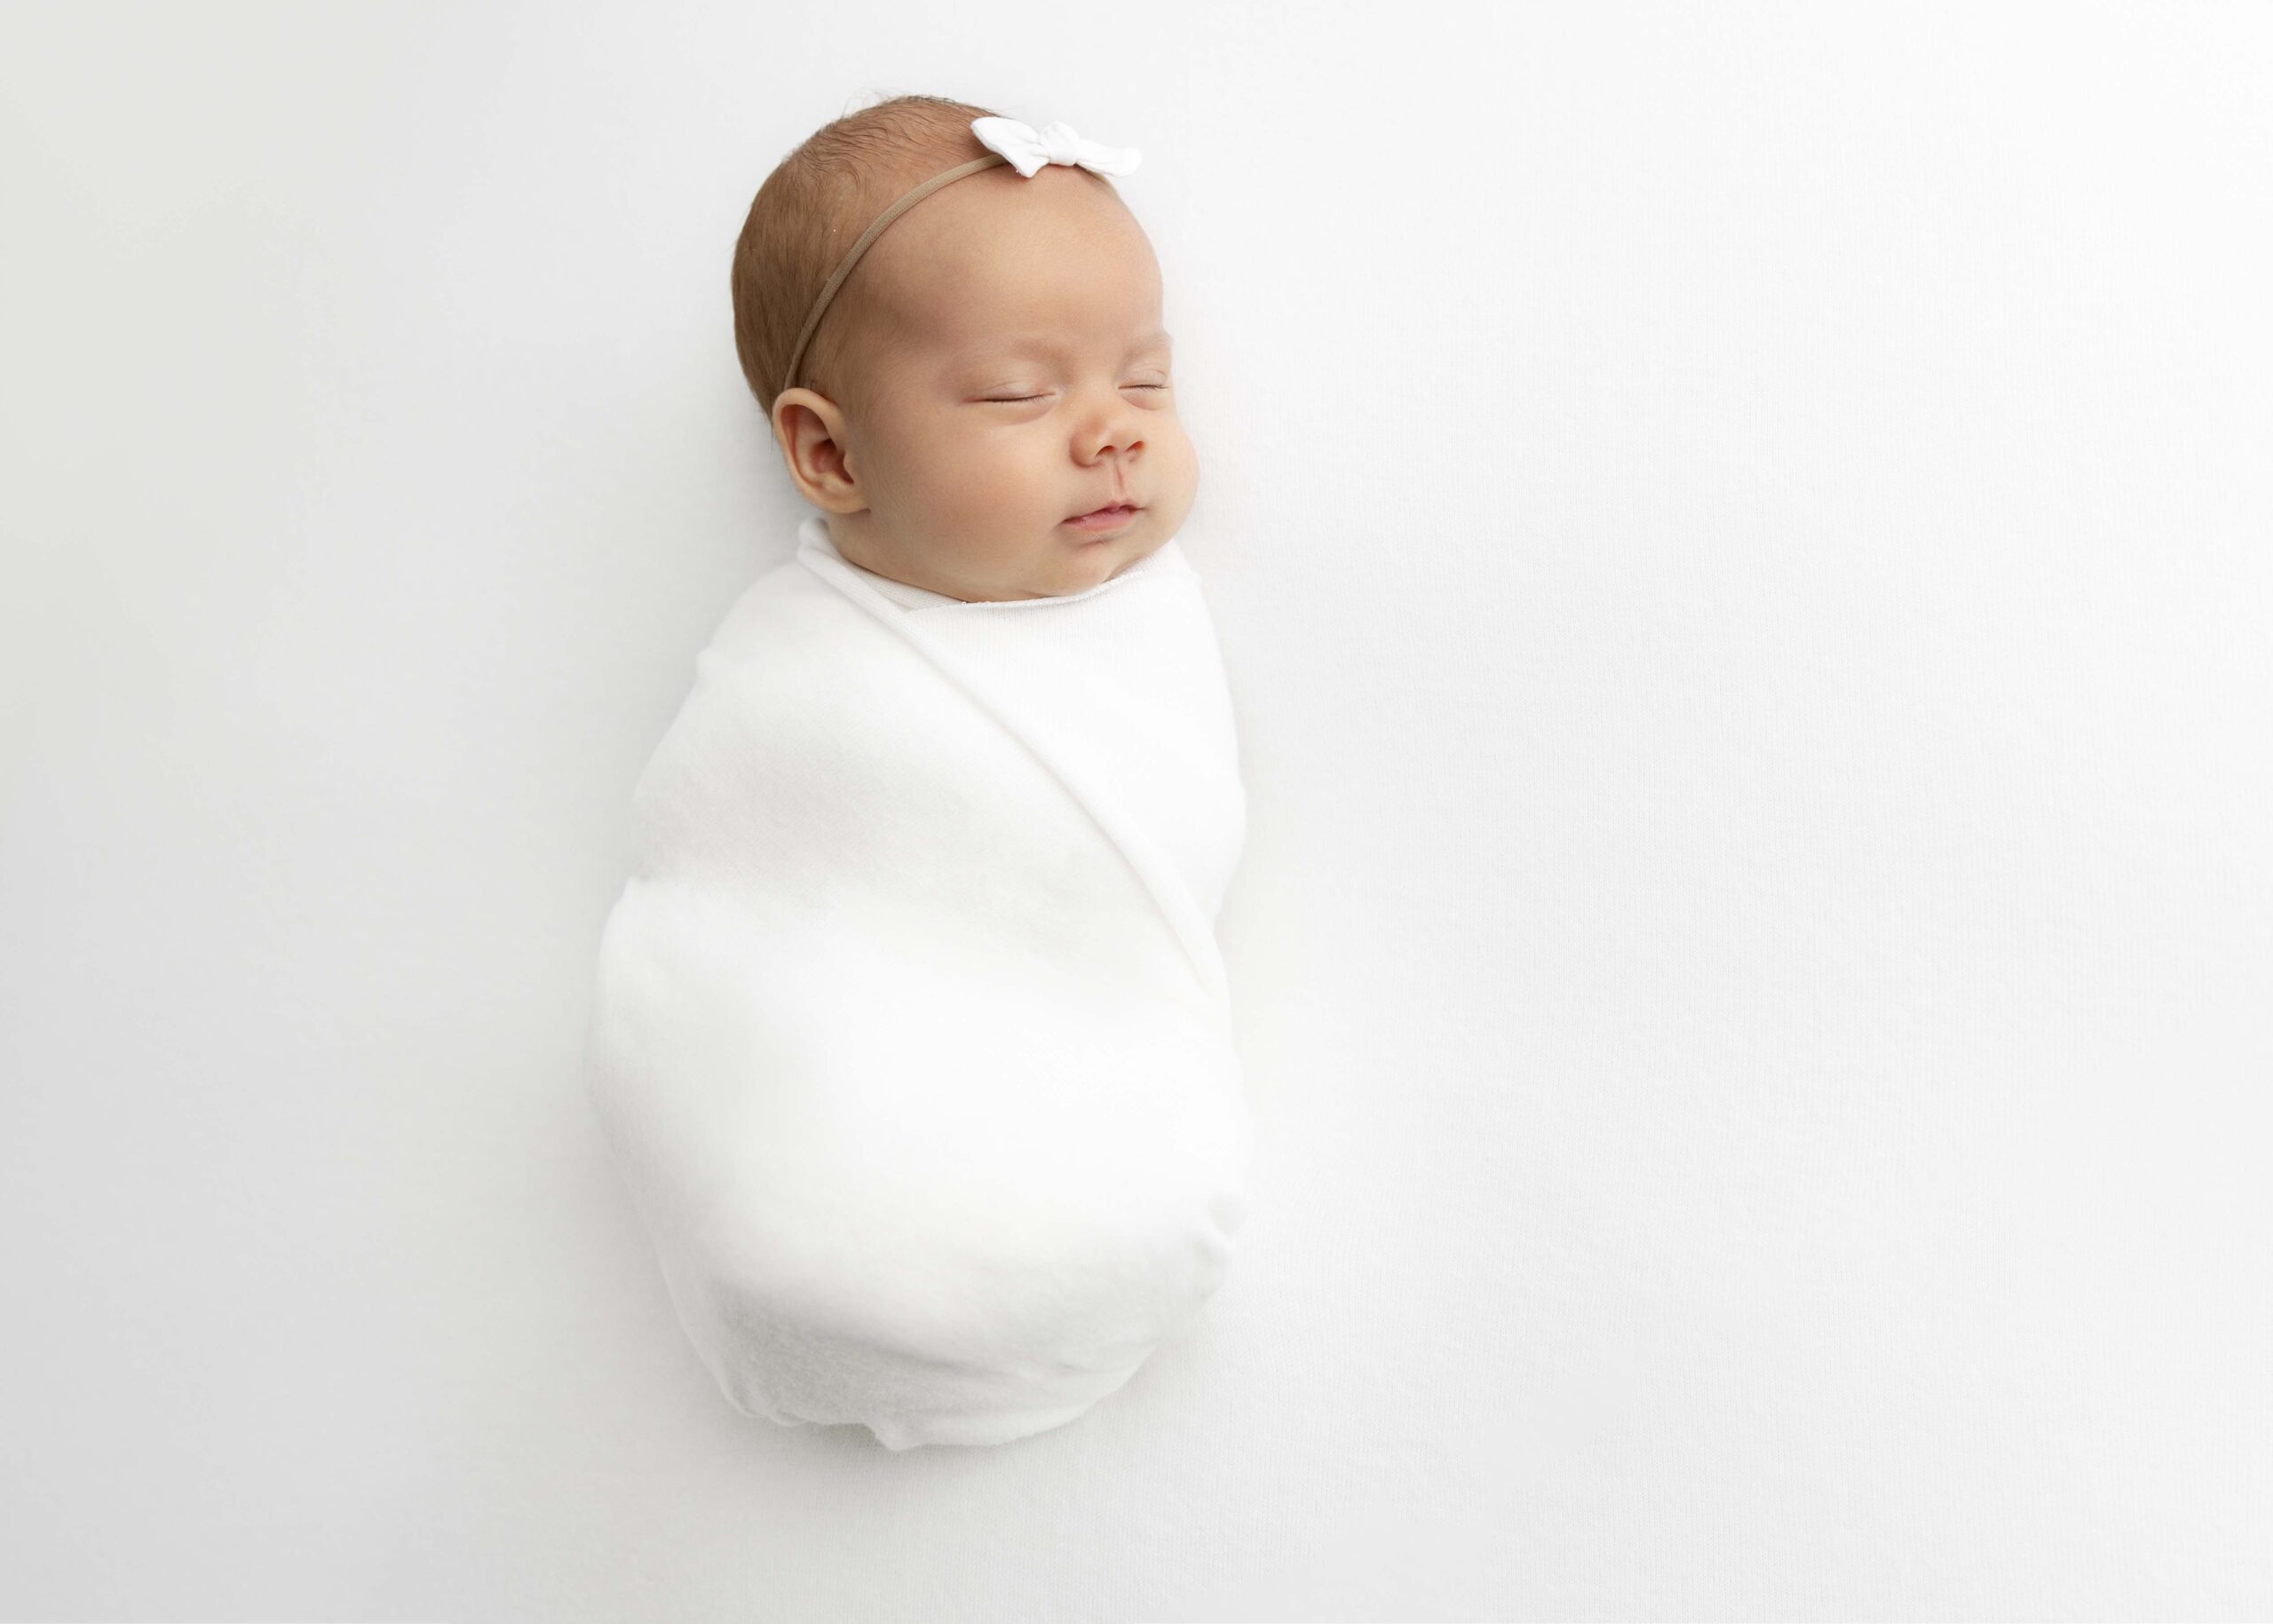 Newborn baby wrapped in white wrap with white bow on her head